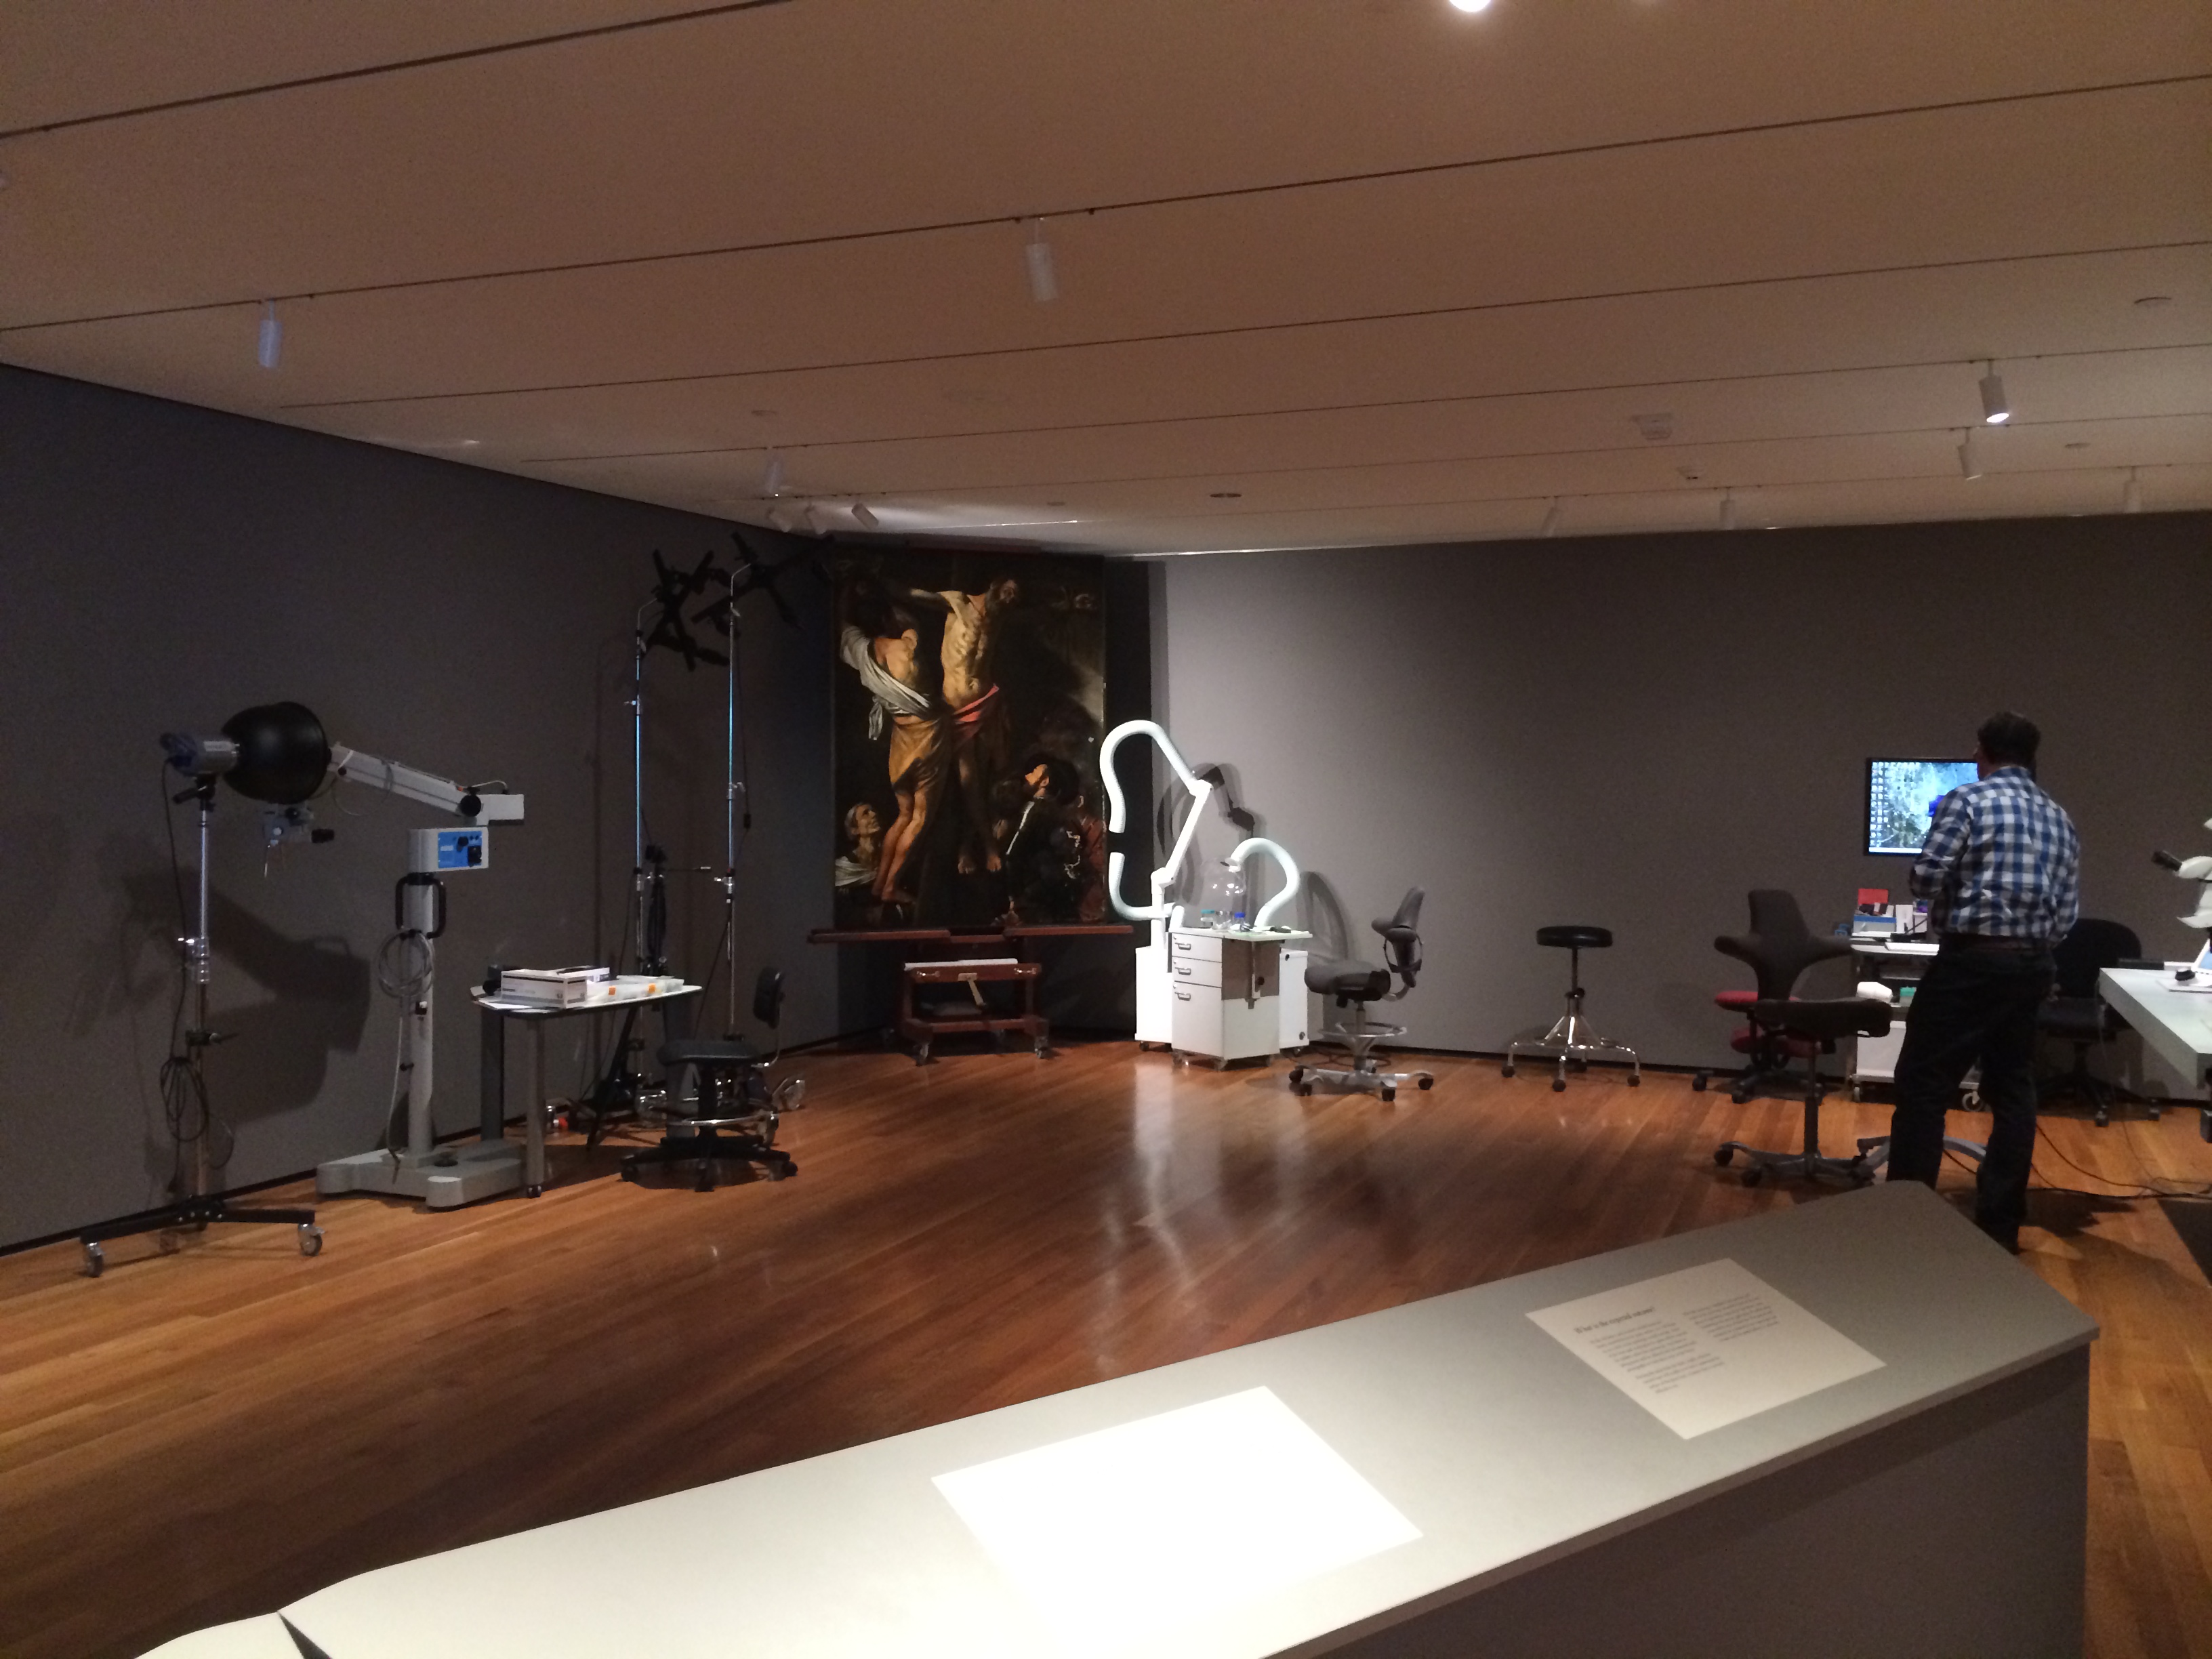 exhibit of machine and equipment at Cleveland Museum of Art